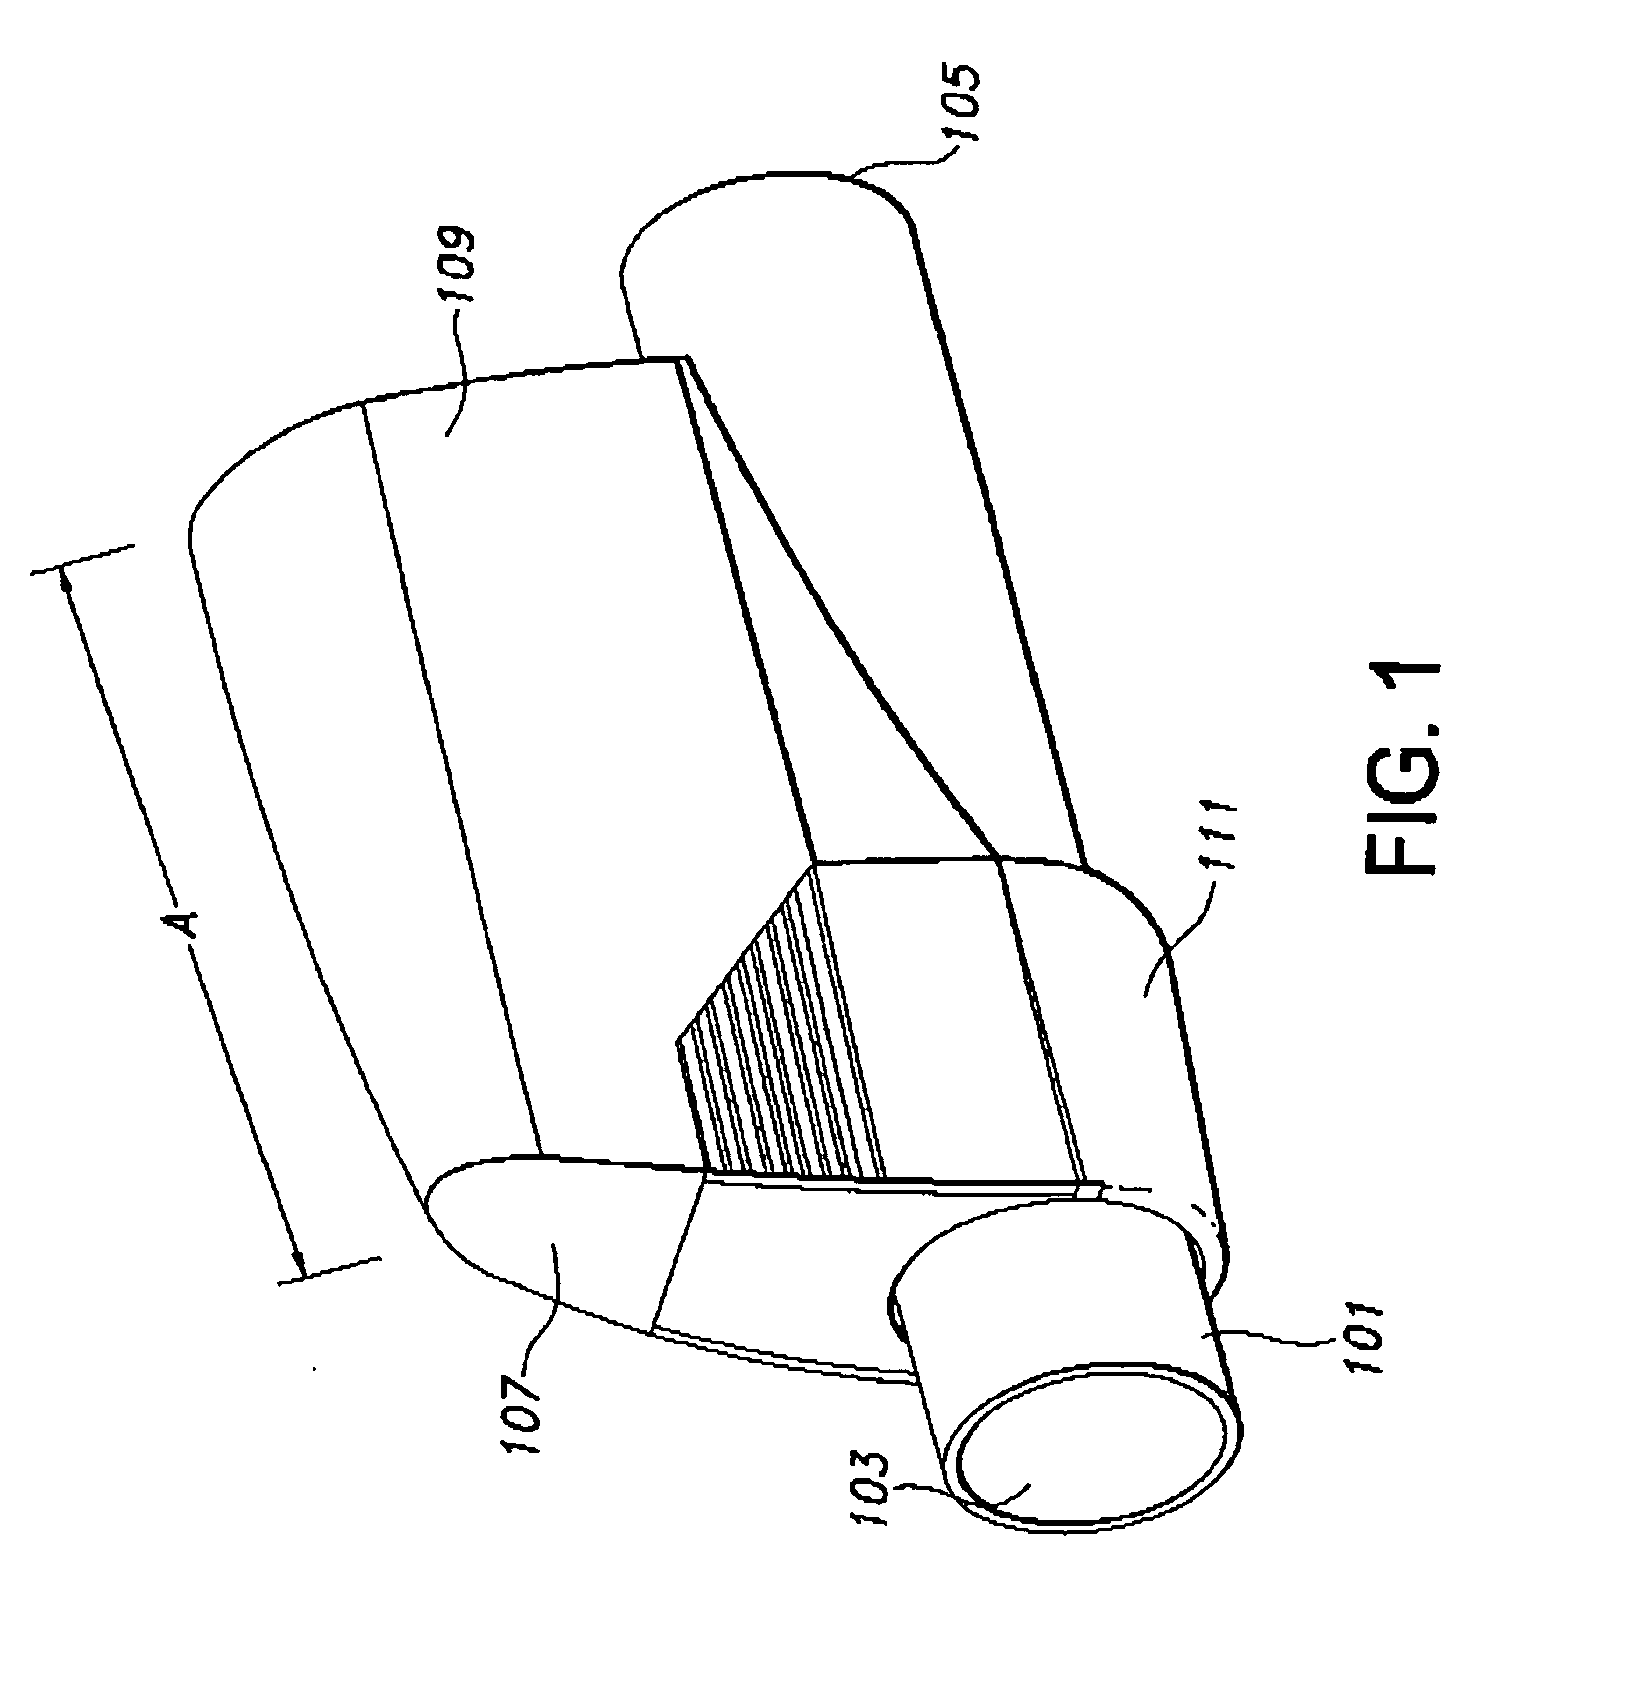 Vessel and method for water treatment